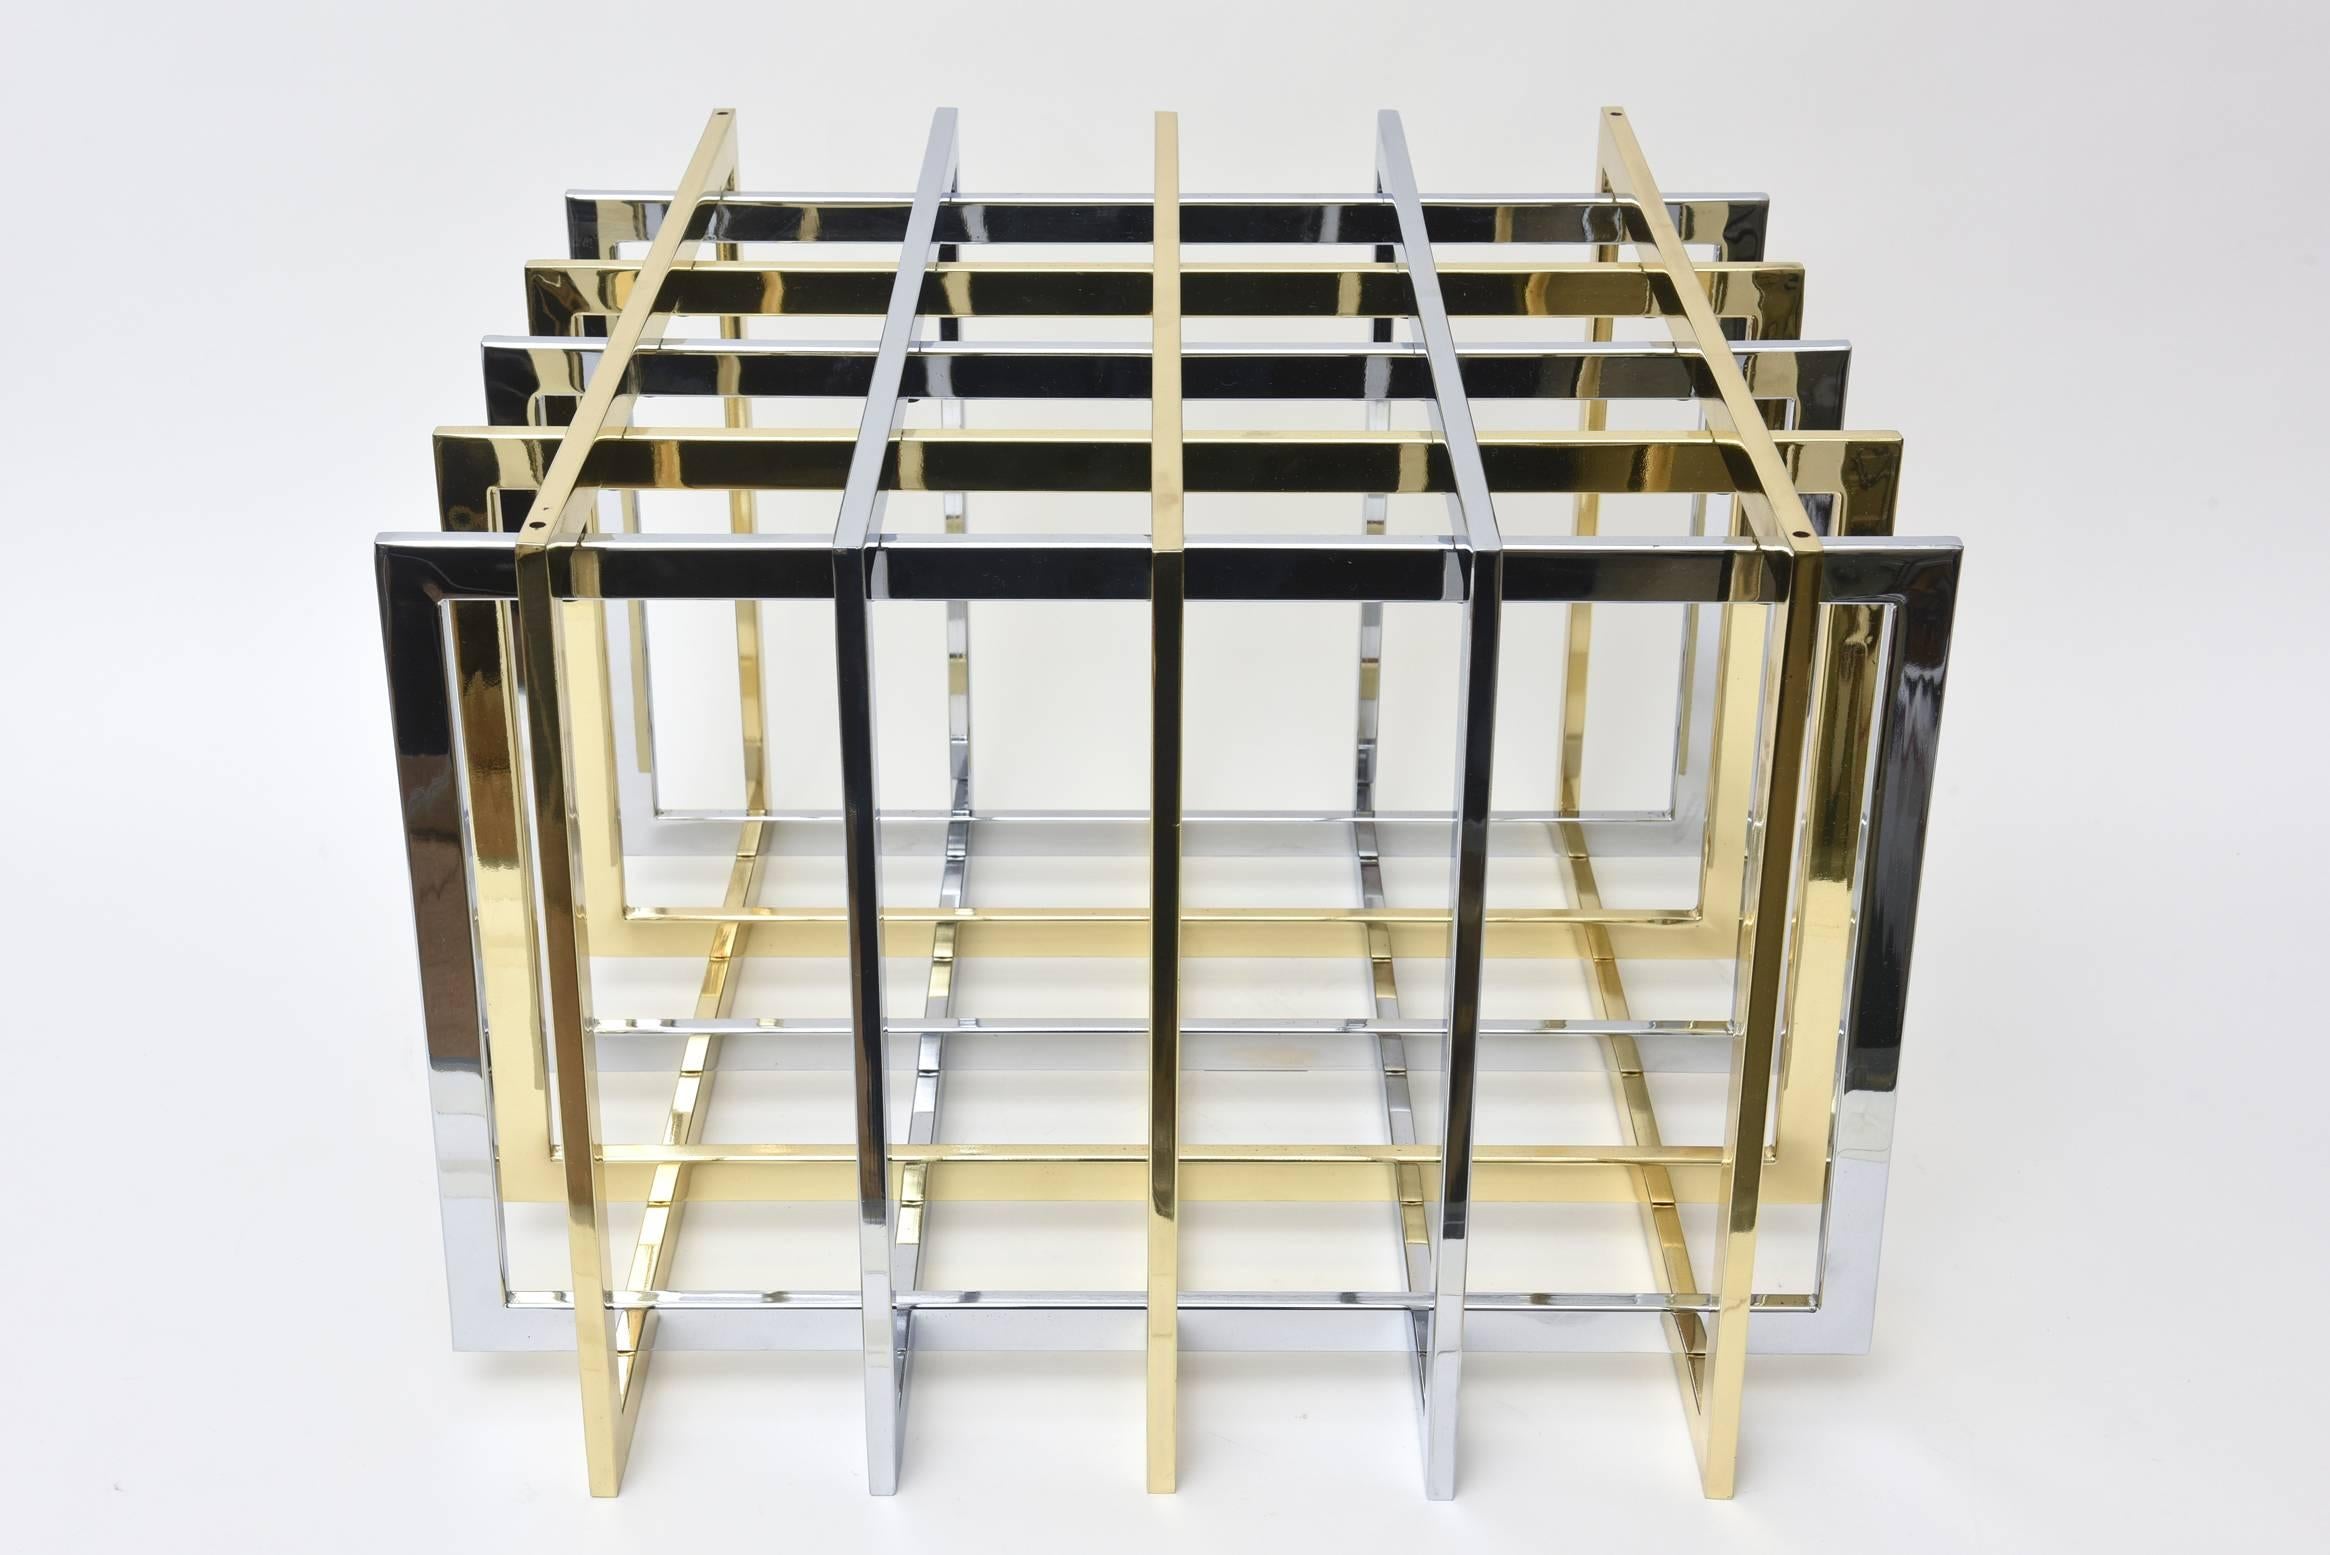 This vintage sculptural two-tone metal side table by Pierre Cardin is called the grid/puzzle table. It has been fully restored and re-plated to the best it can be given the age. It is chrome-plated and brass plated over brass. Still remains modern